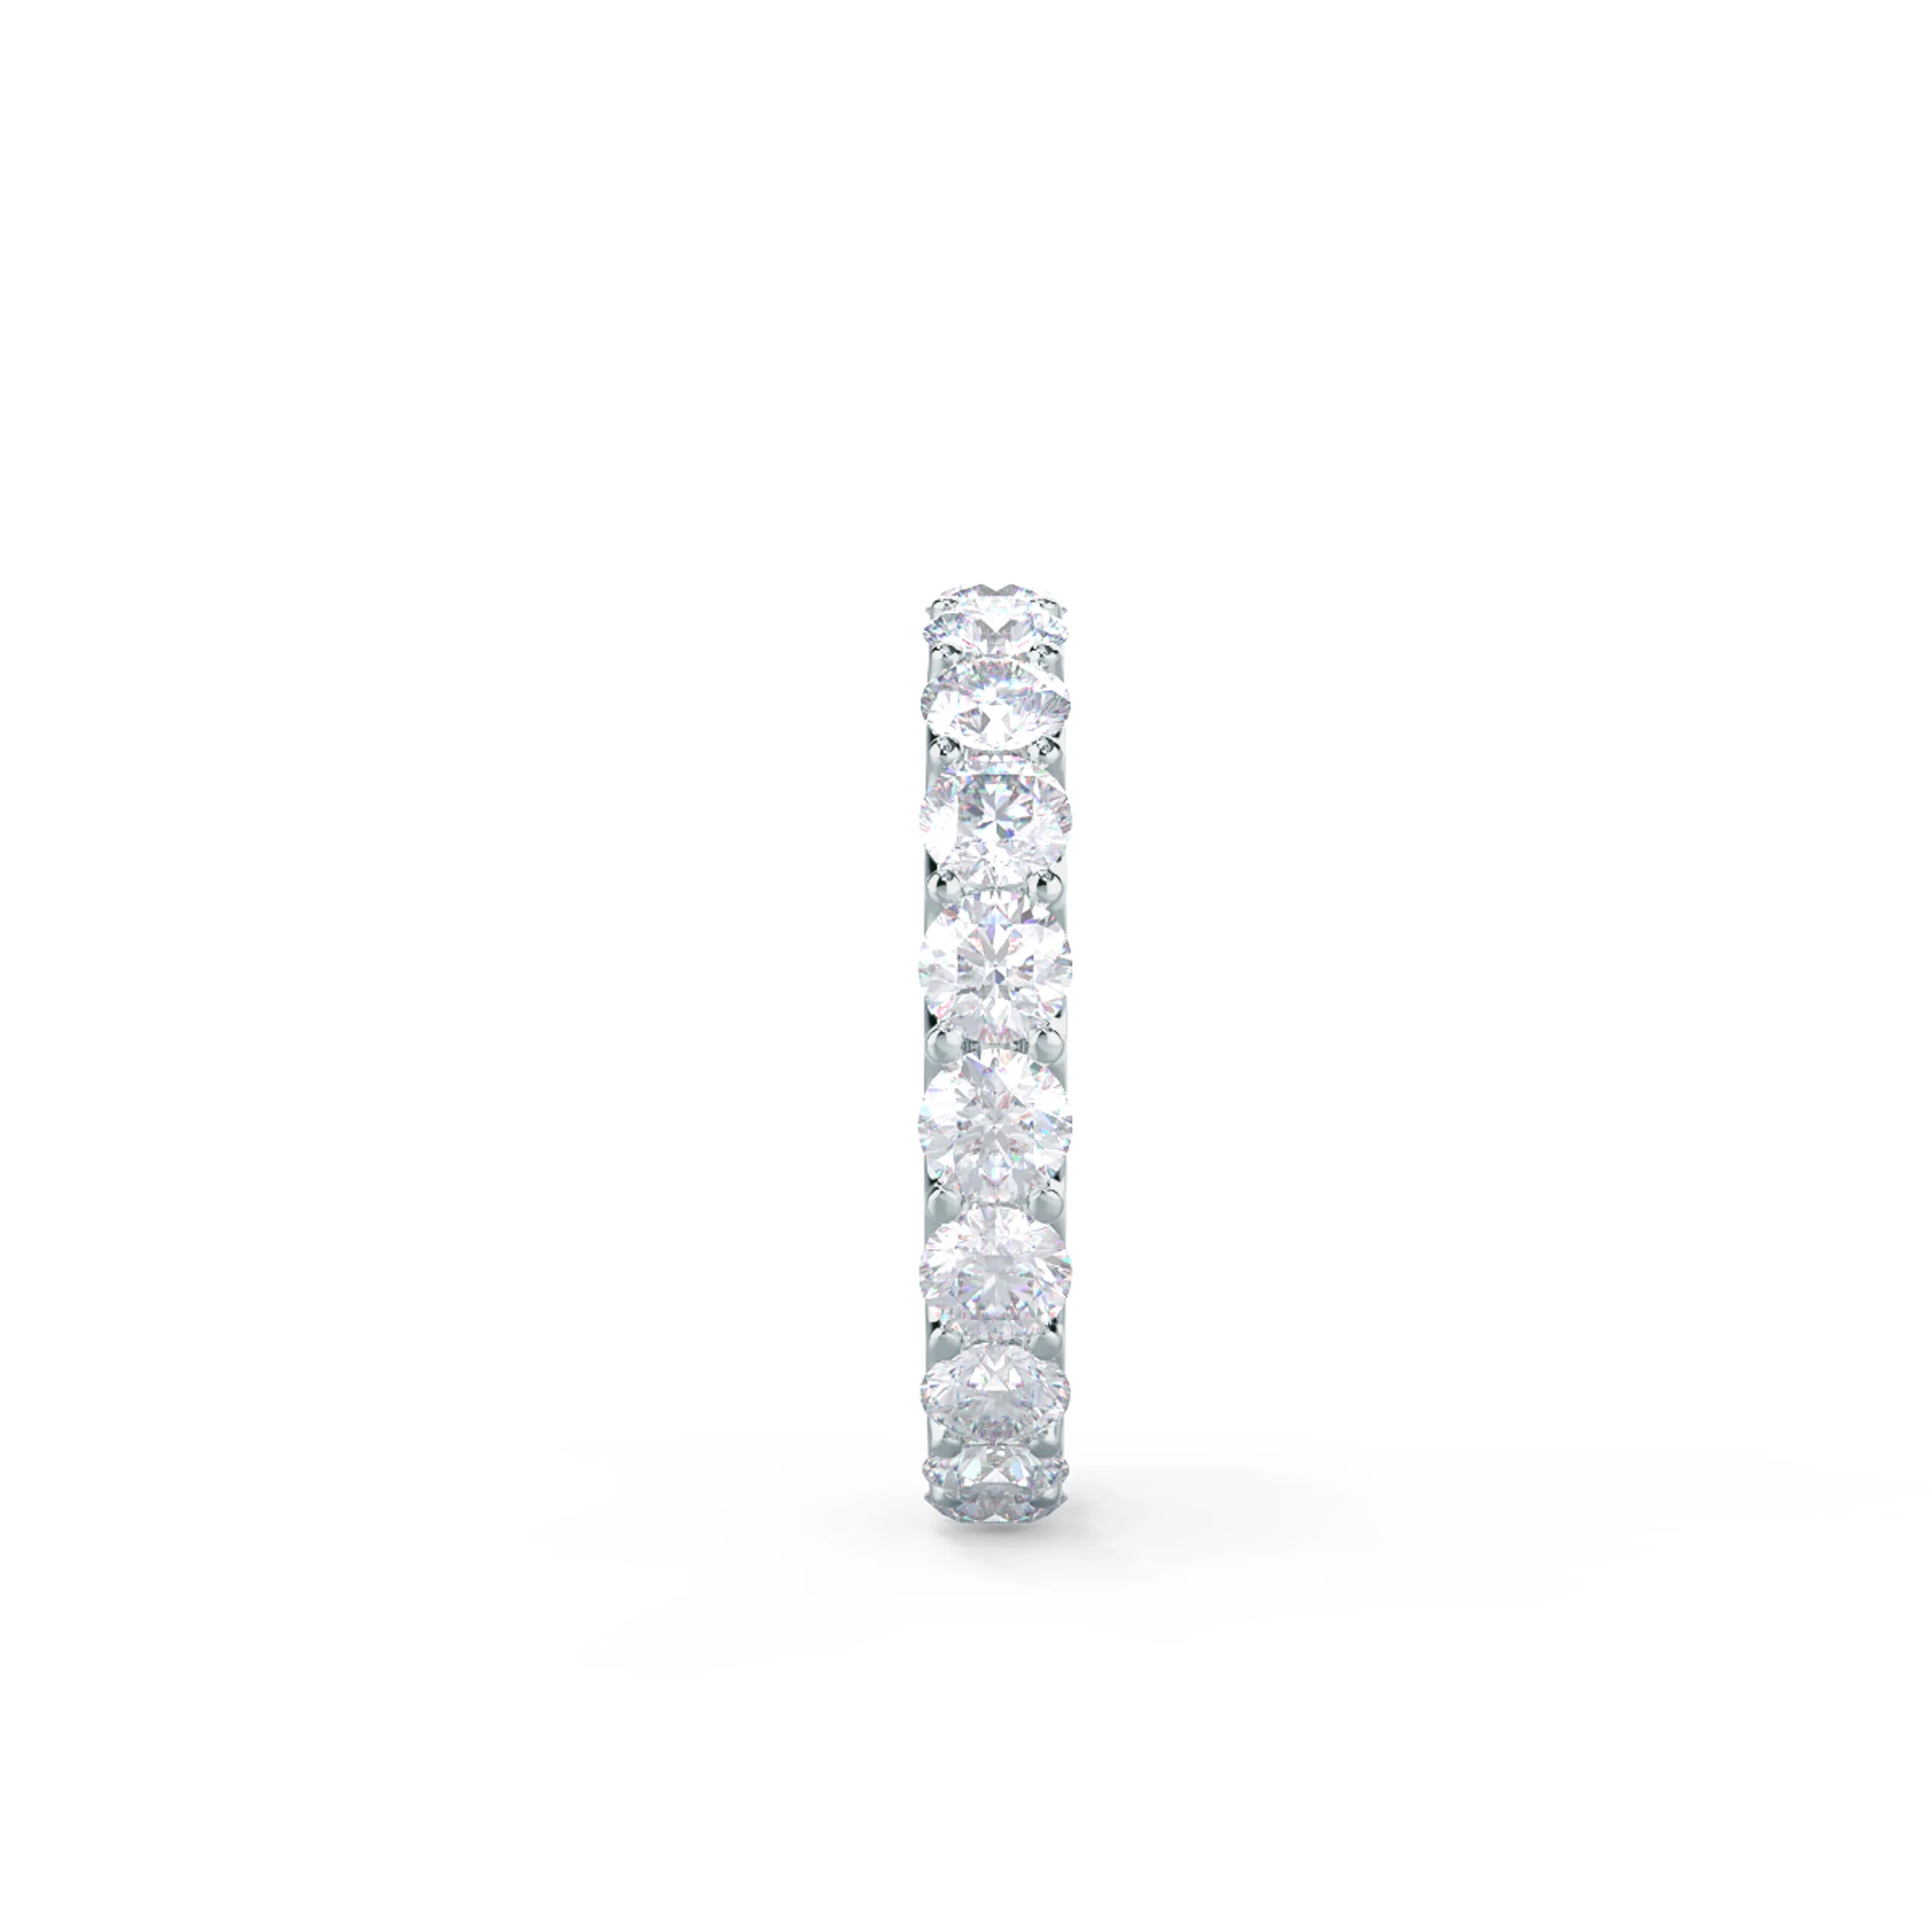 18k White Gold French U Round Eternity Band featuring Exceptional Quality 2.65 ctw Diamonds (Side View)